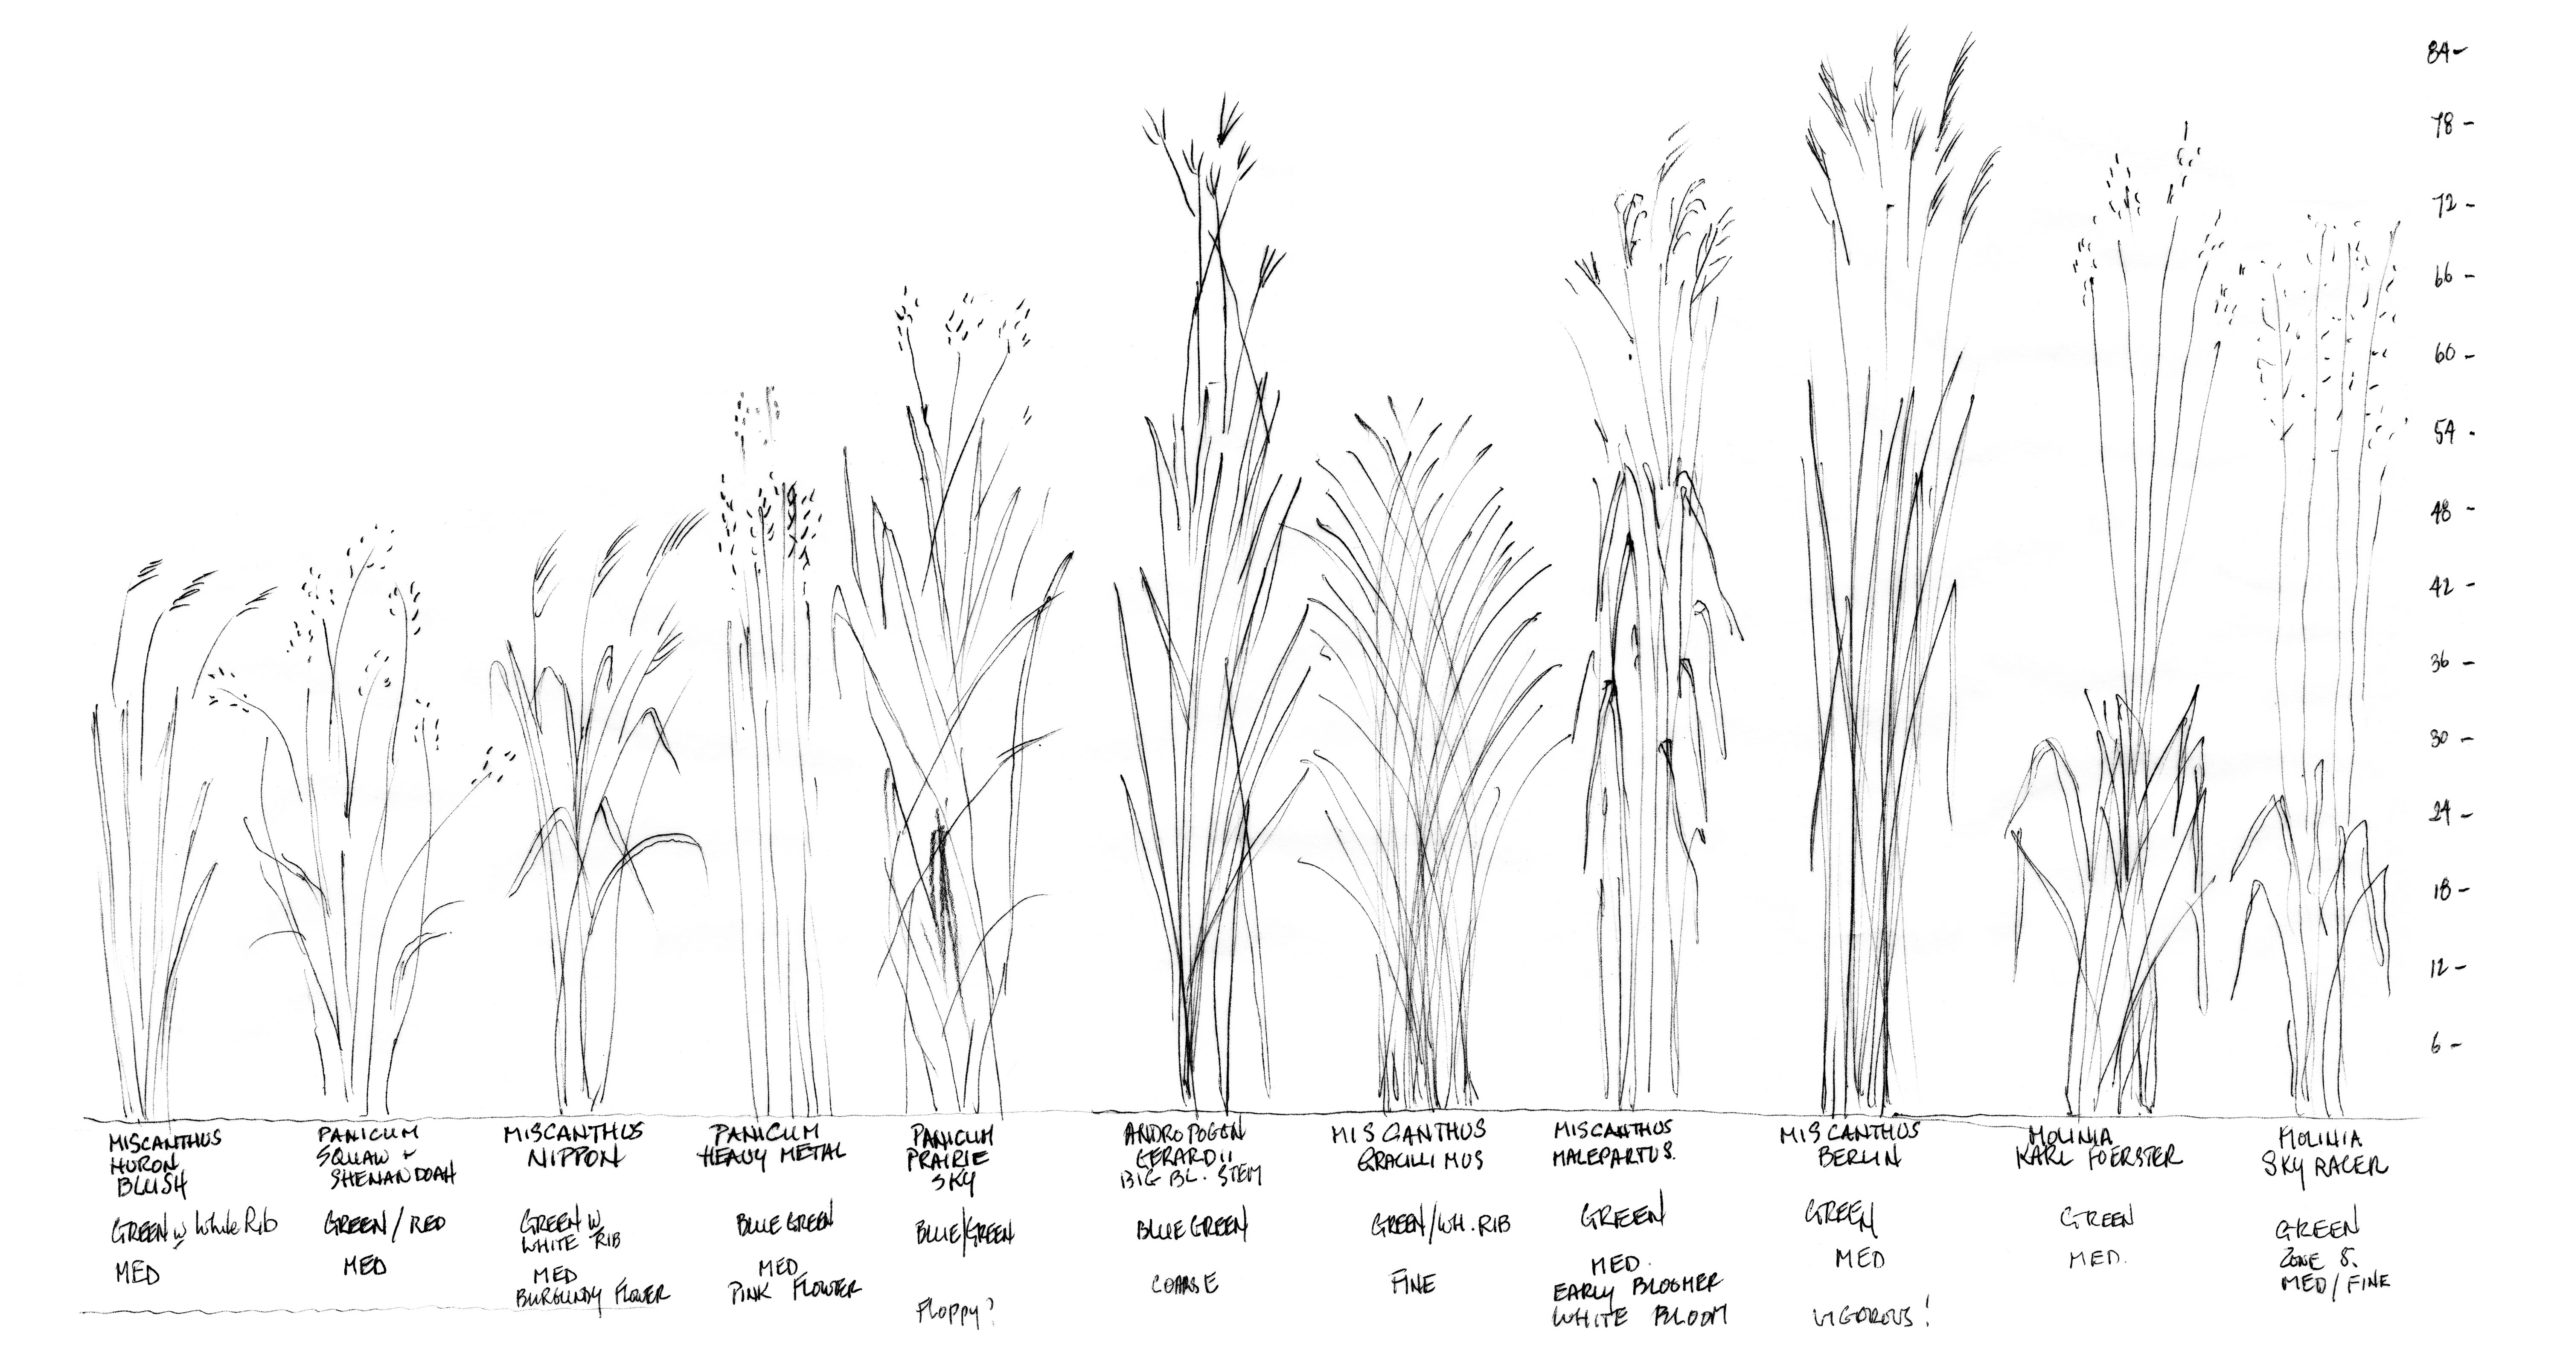 Misha’s handdrawn legend of the grasses in her garden. Click for full size drawing.